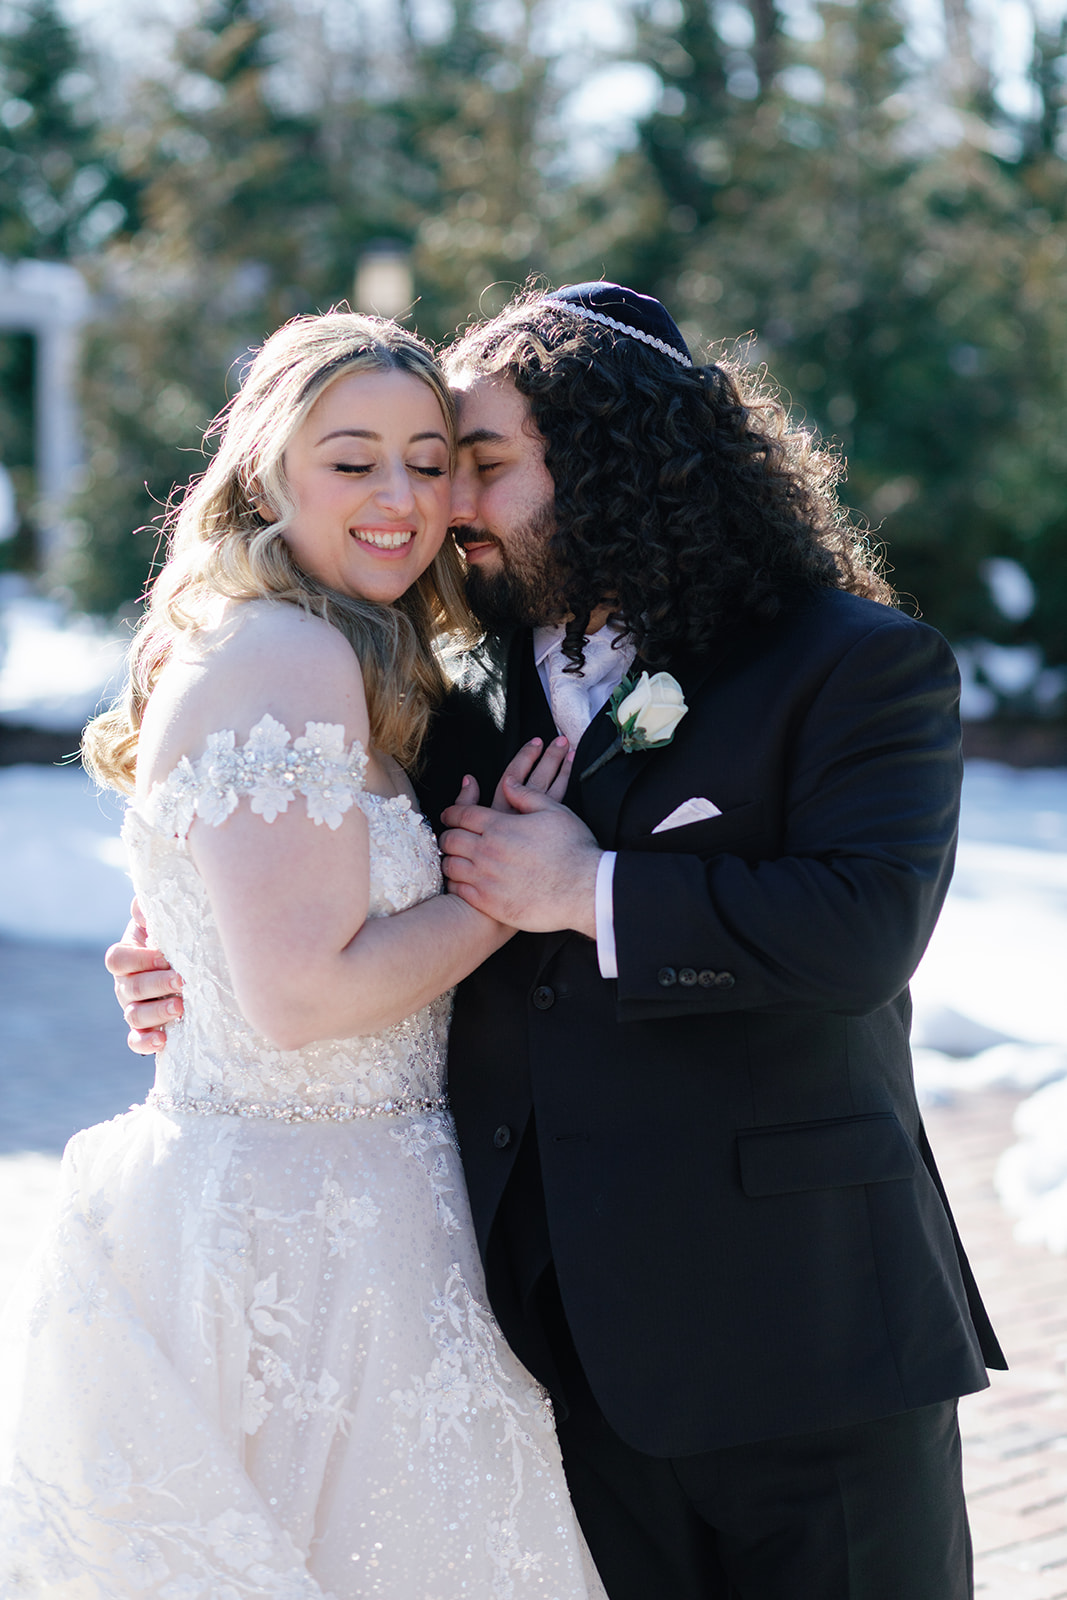 Newlyweds dance close and share a quiet moment outside in the snow